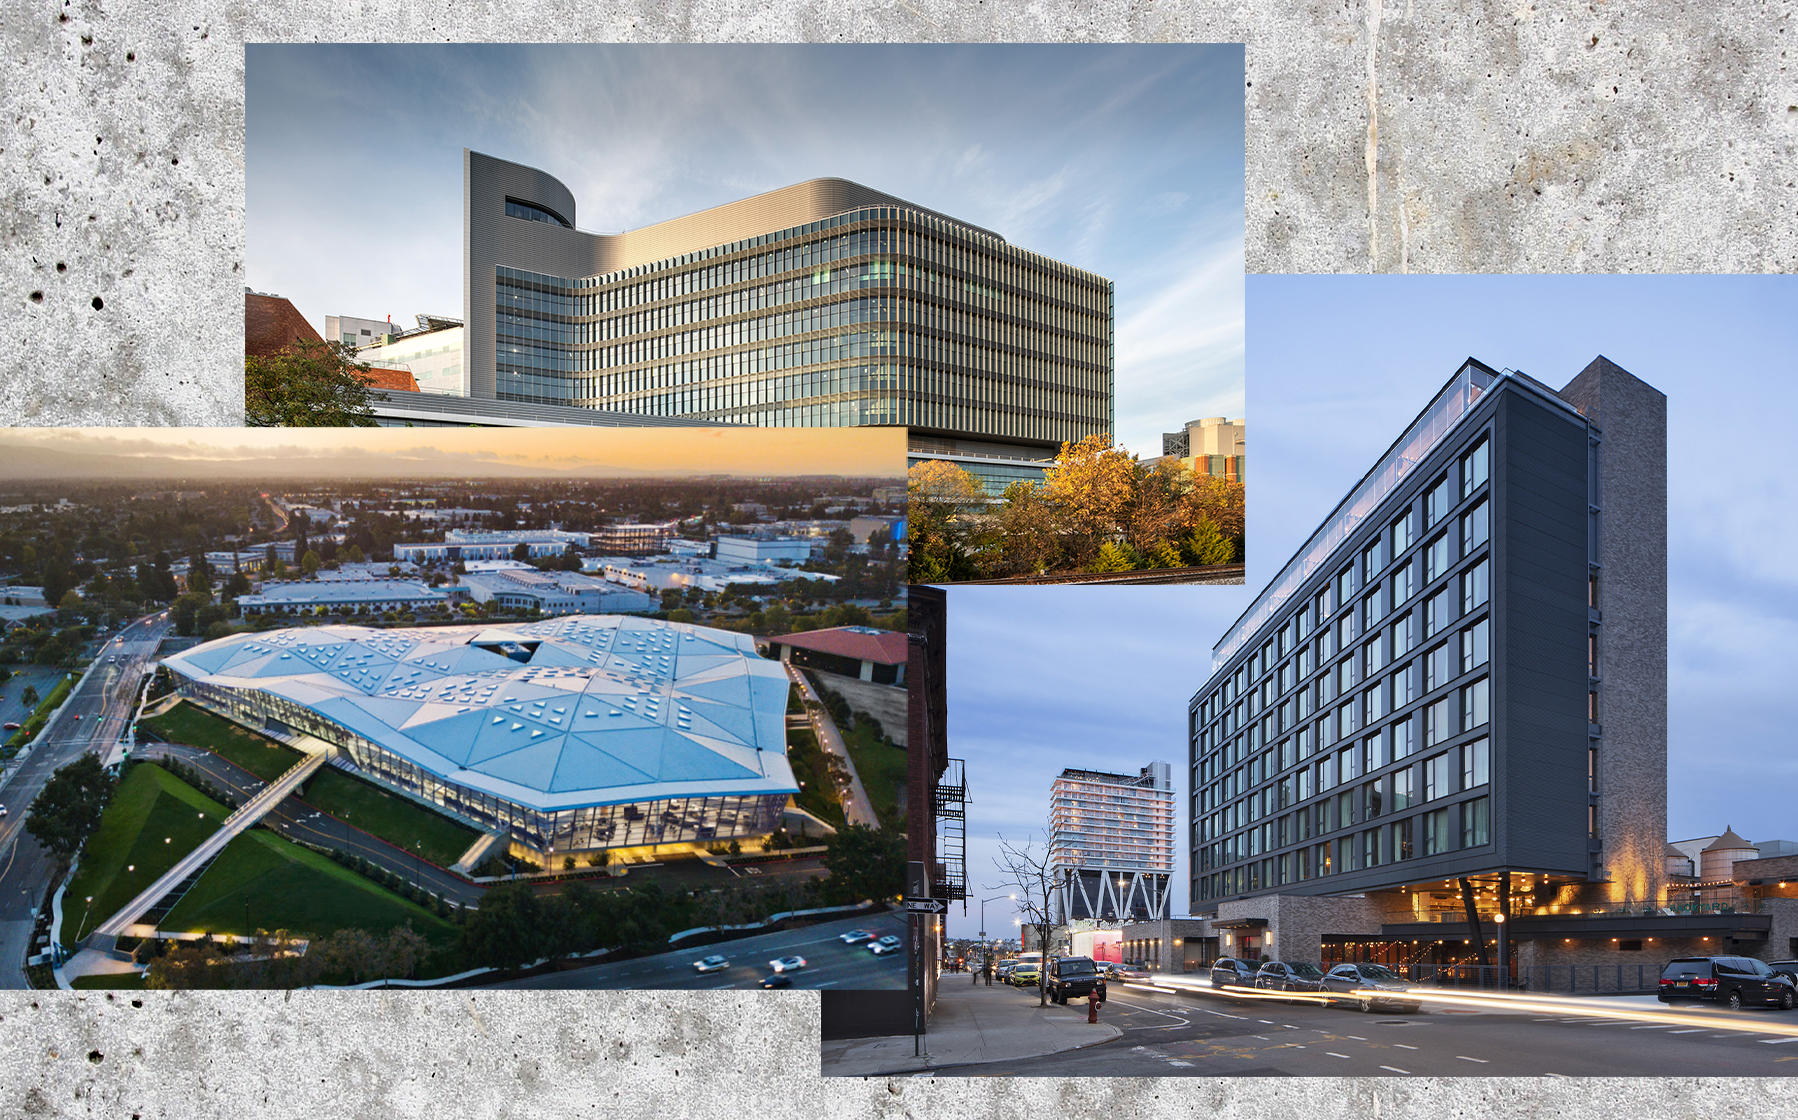 Renderings of Nvidia headquarters by Gensler, University of Virginia University Hospital Expansion by Perkins and Will and The Hoxton Williamsburg by Perkins Eastman (Credit: Gensler; Perkins and Will; Perkins Eastman)